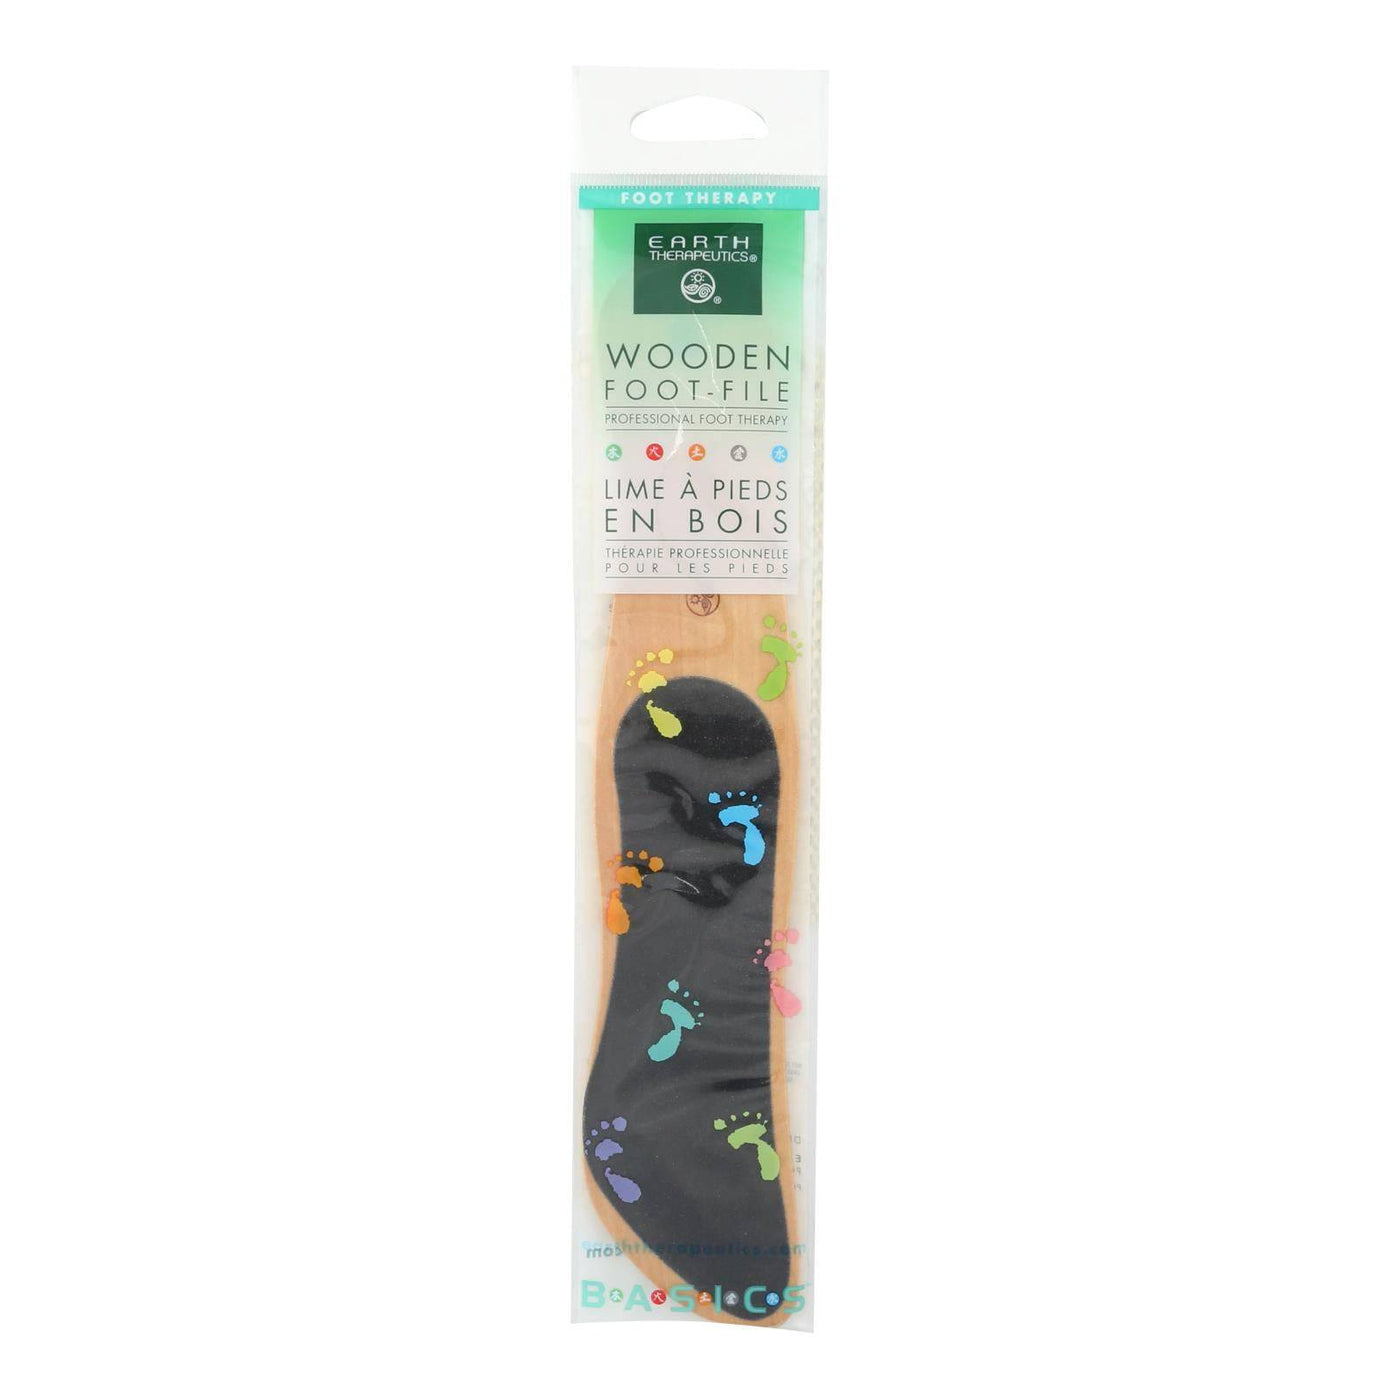 Earth Therapeutics Wooden Foot File - 1 File | OnlyNaturals.us